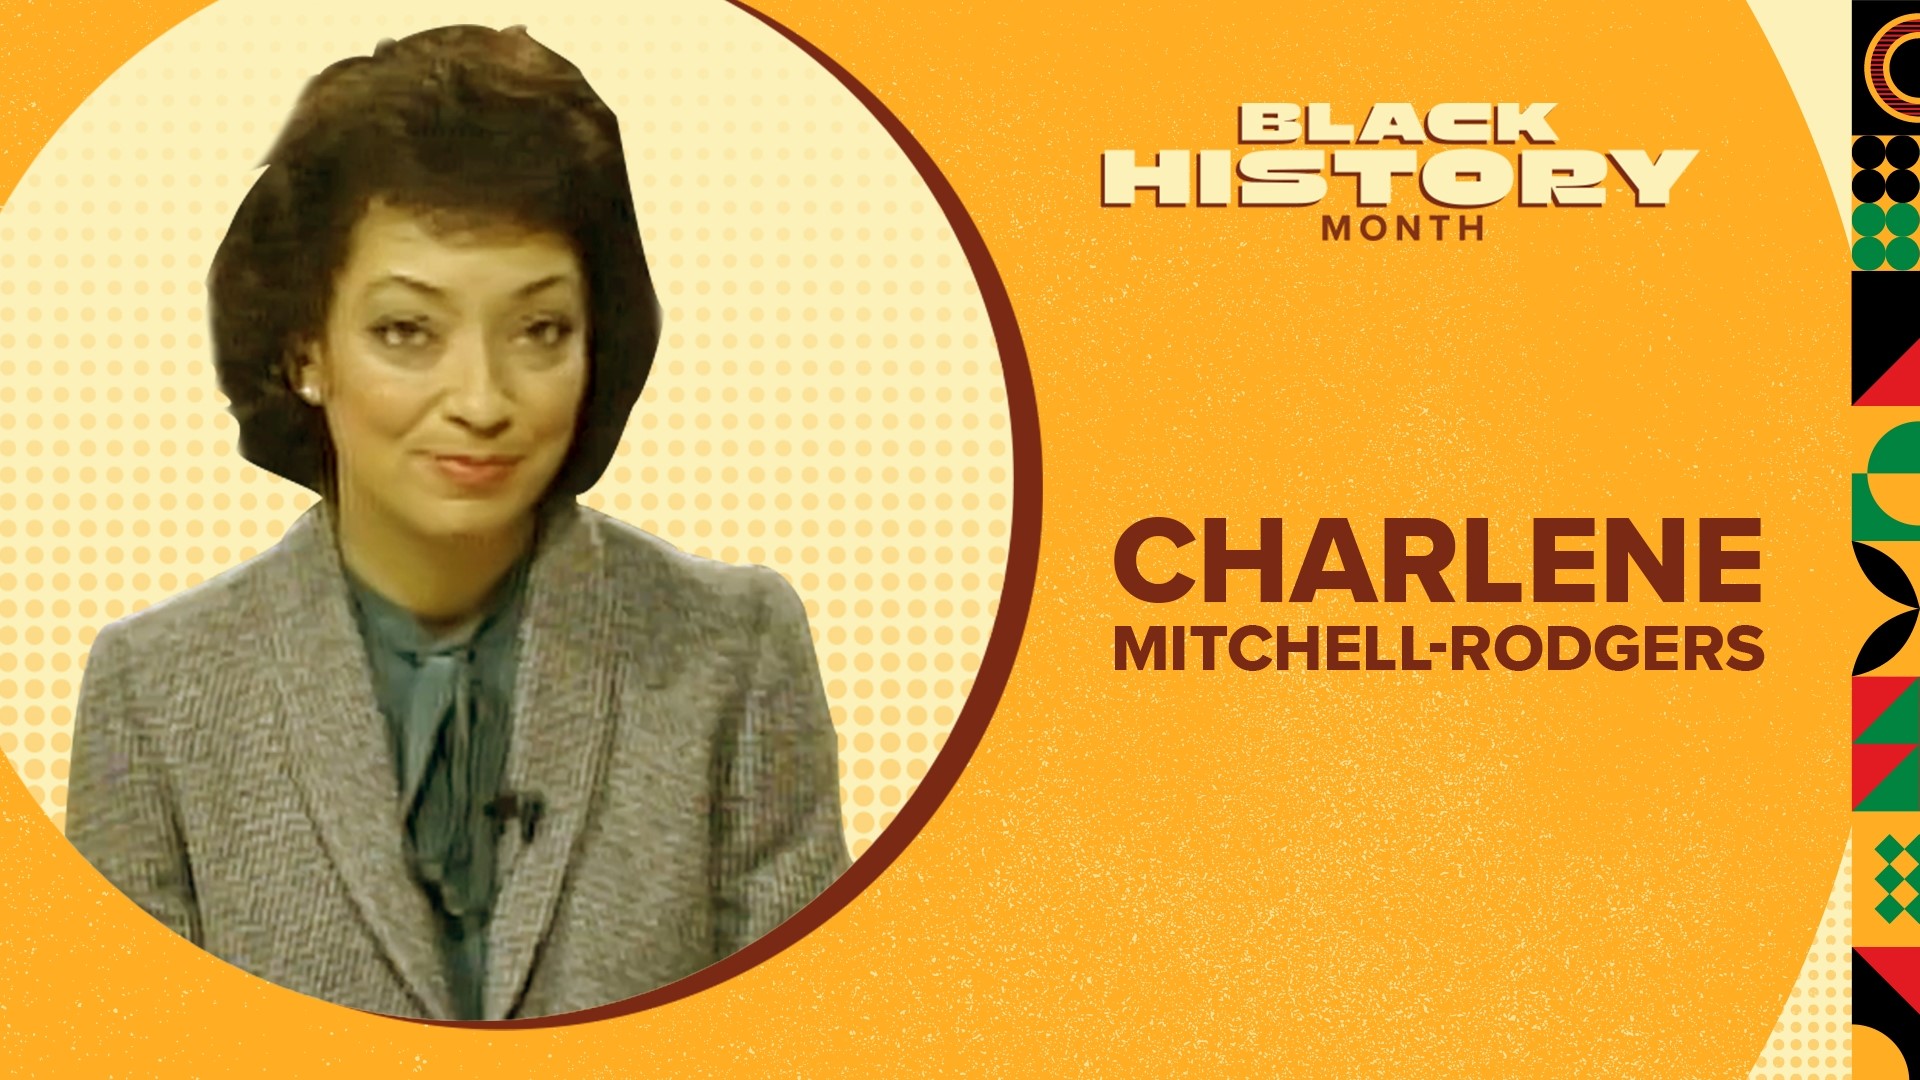 TaTiana Cash introduces us to one of the first Black female reporters at WTOL 11, Charlene Mitchell-Rodgers, who discusses her journey in journalism.